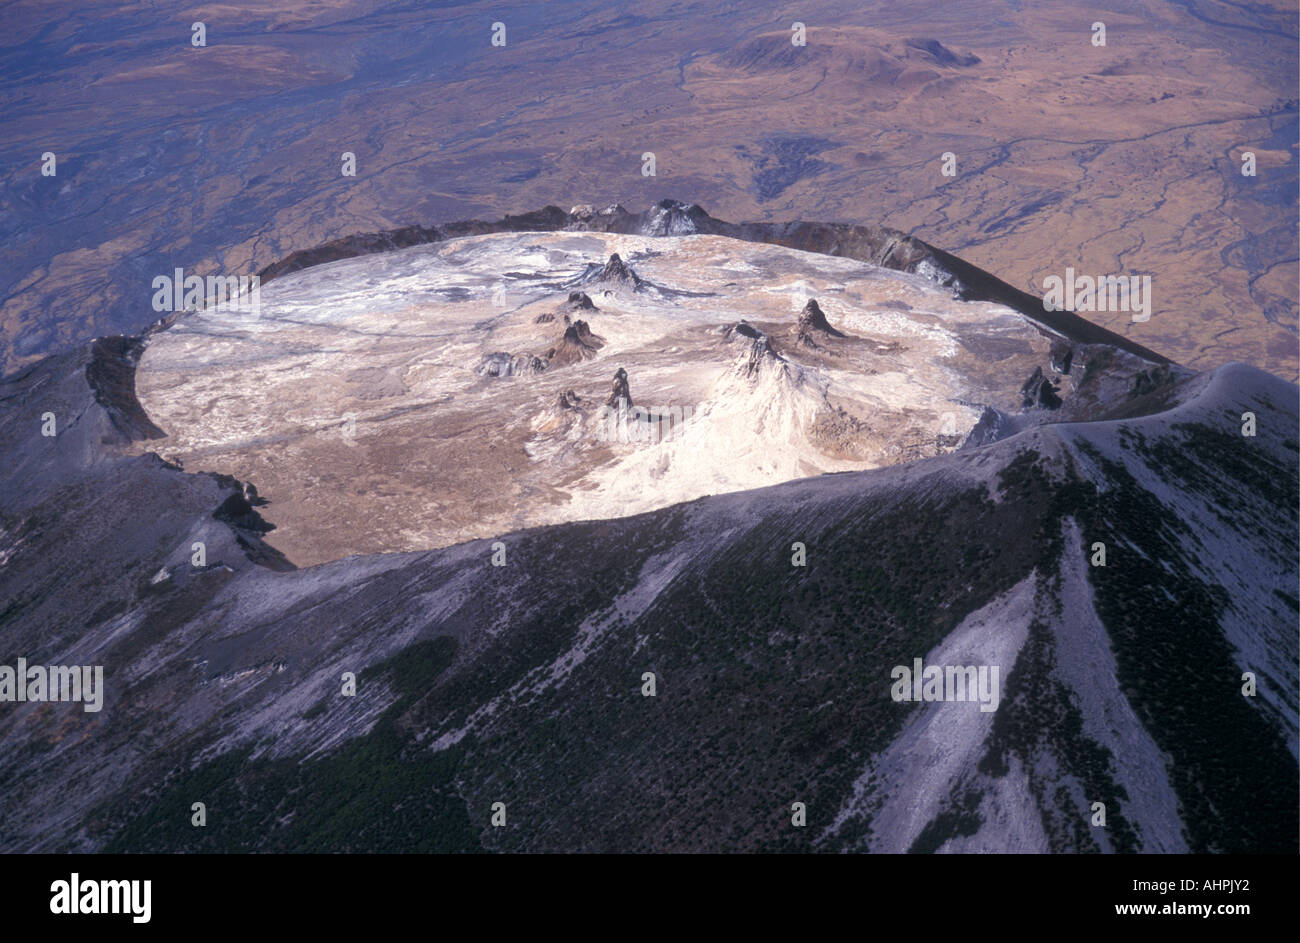 Aerial view of Ol Doinyo Lengai or mountain of god northern Tanzania East Africa Stock Photo